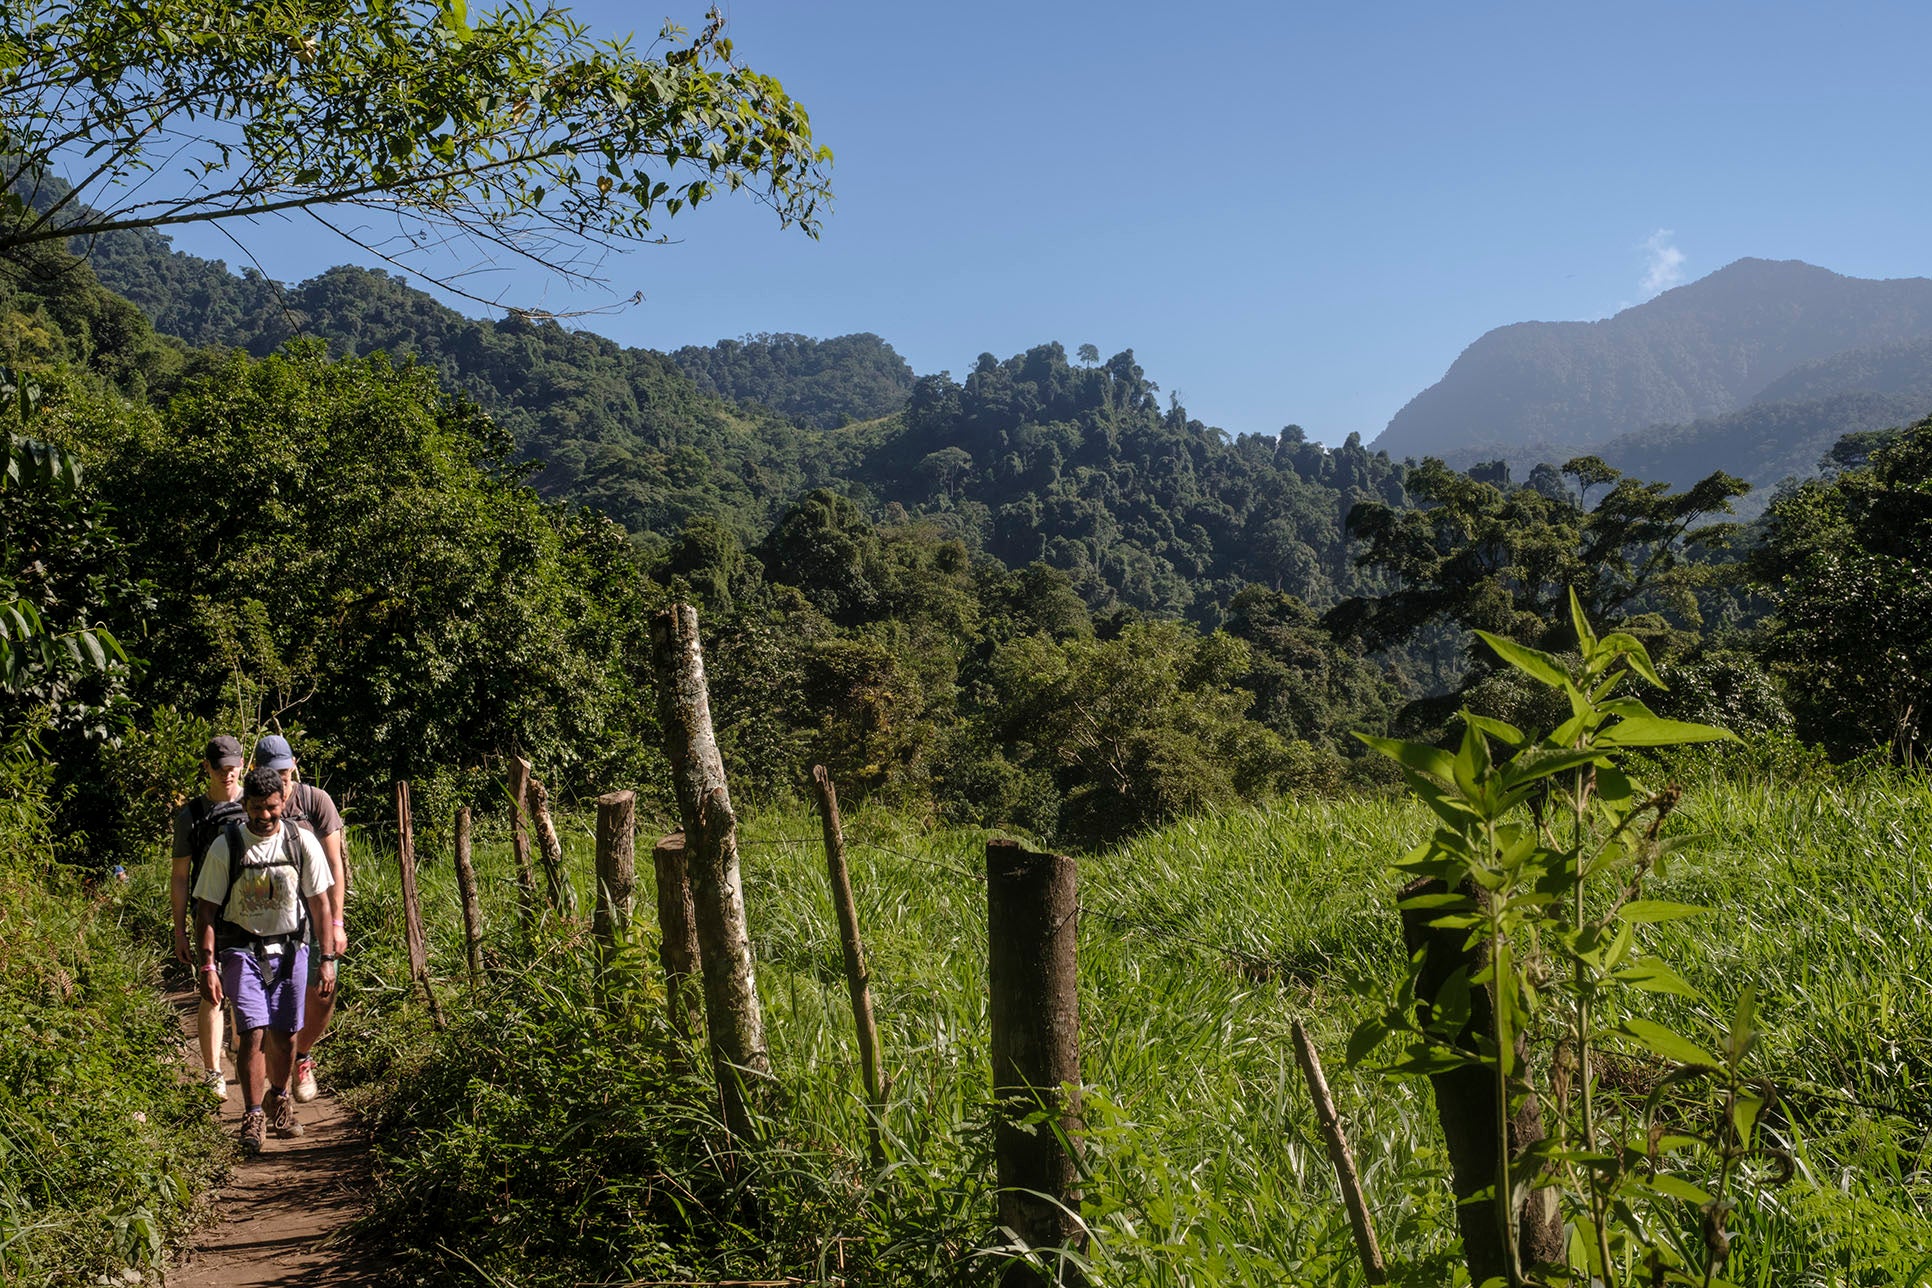 The hike takes visitors deep into remote Colombia